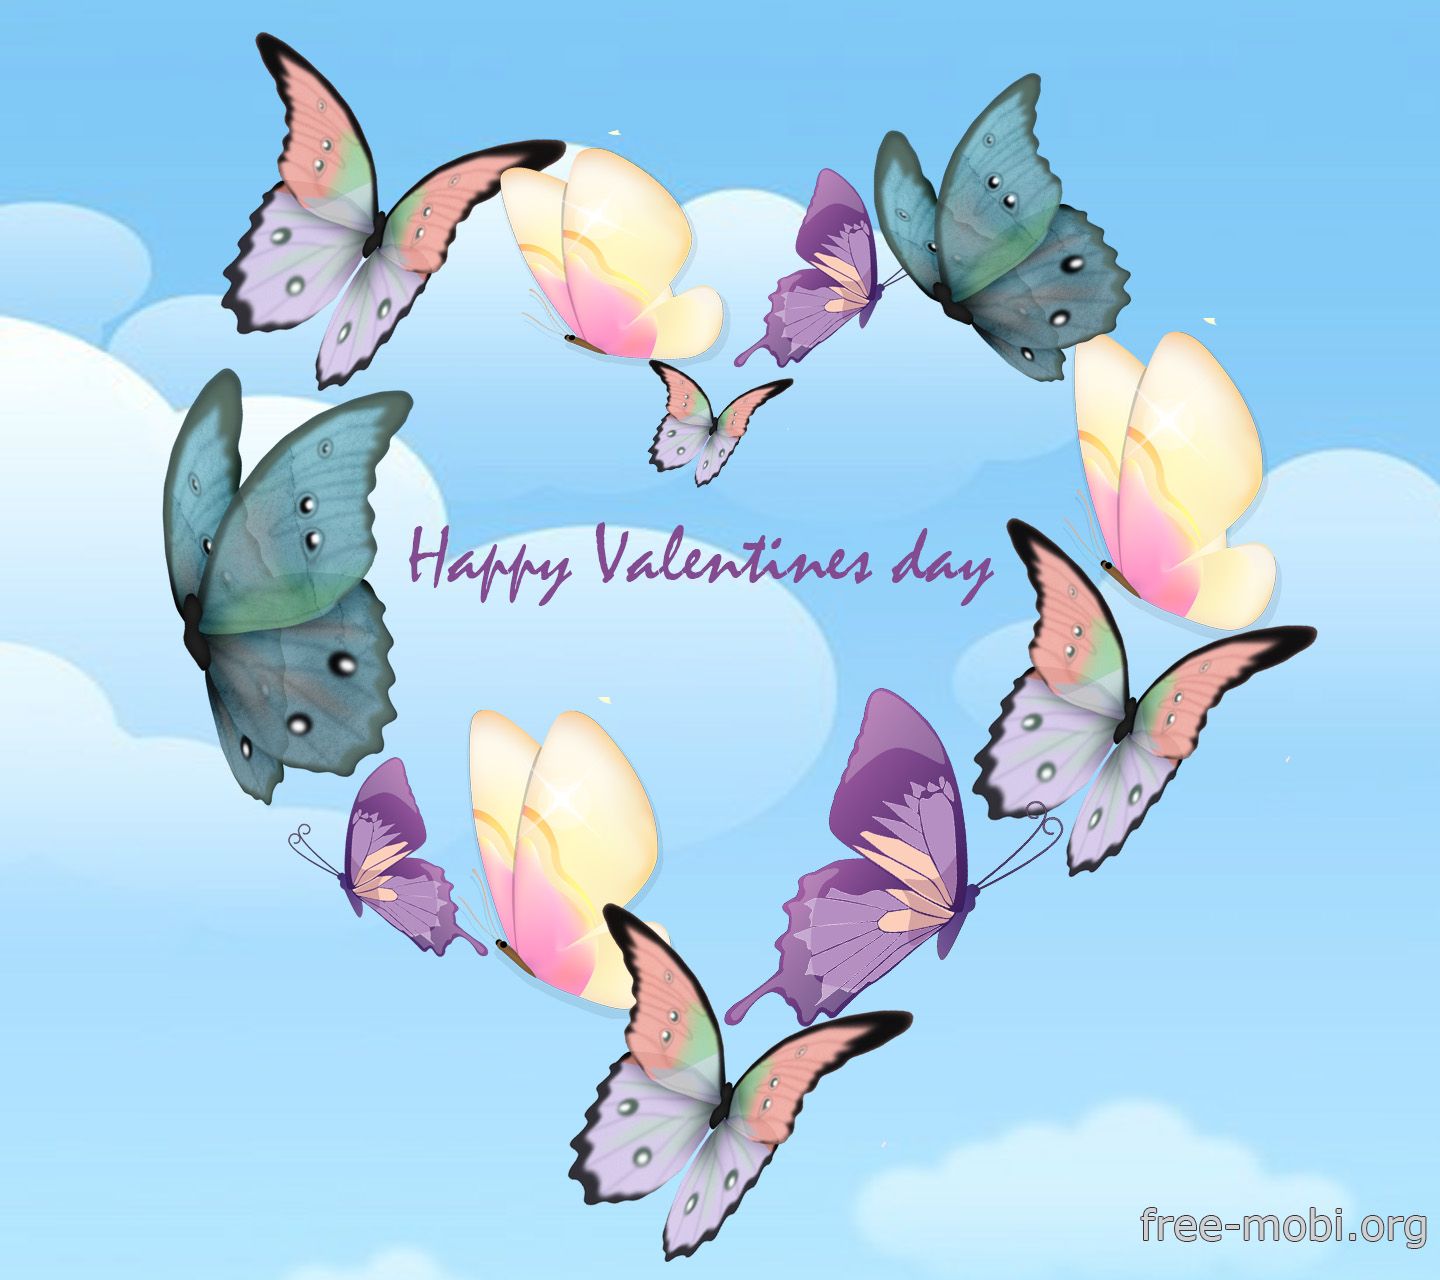 Happy Valentines day butterflies, download for free